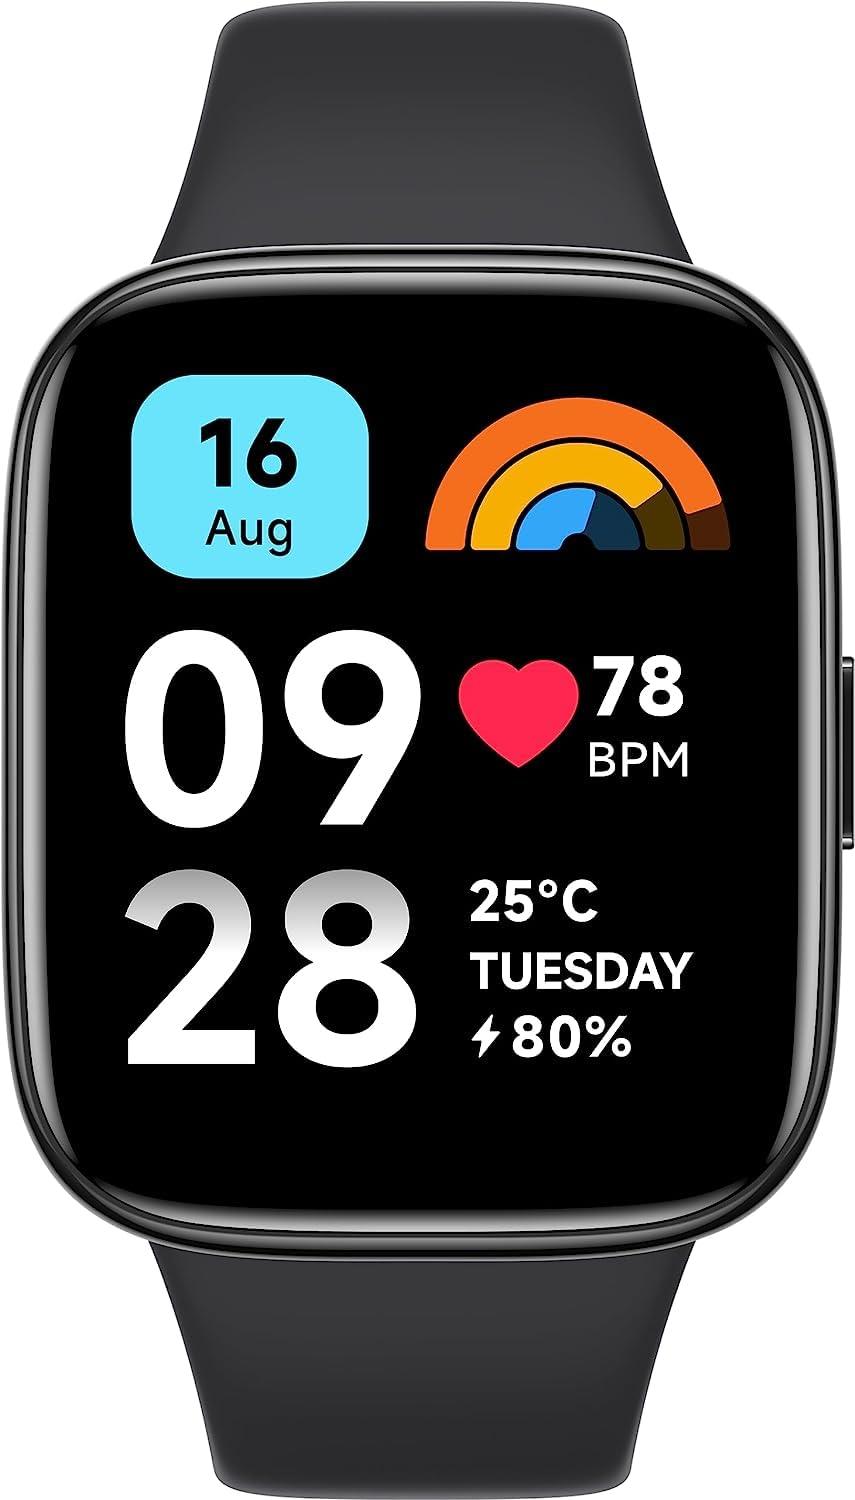 XIAOMI Redmi Watch 3 Active Black -New Arrival!! Hot selling - XIAOMI HOME KENYA OFFICIAL AUTHORIZED STORE